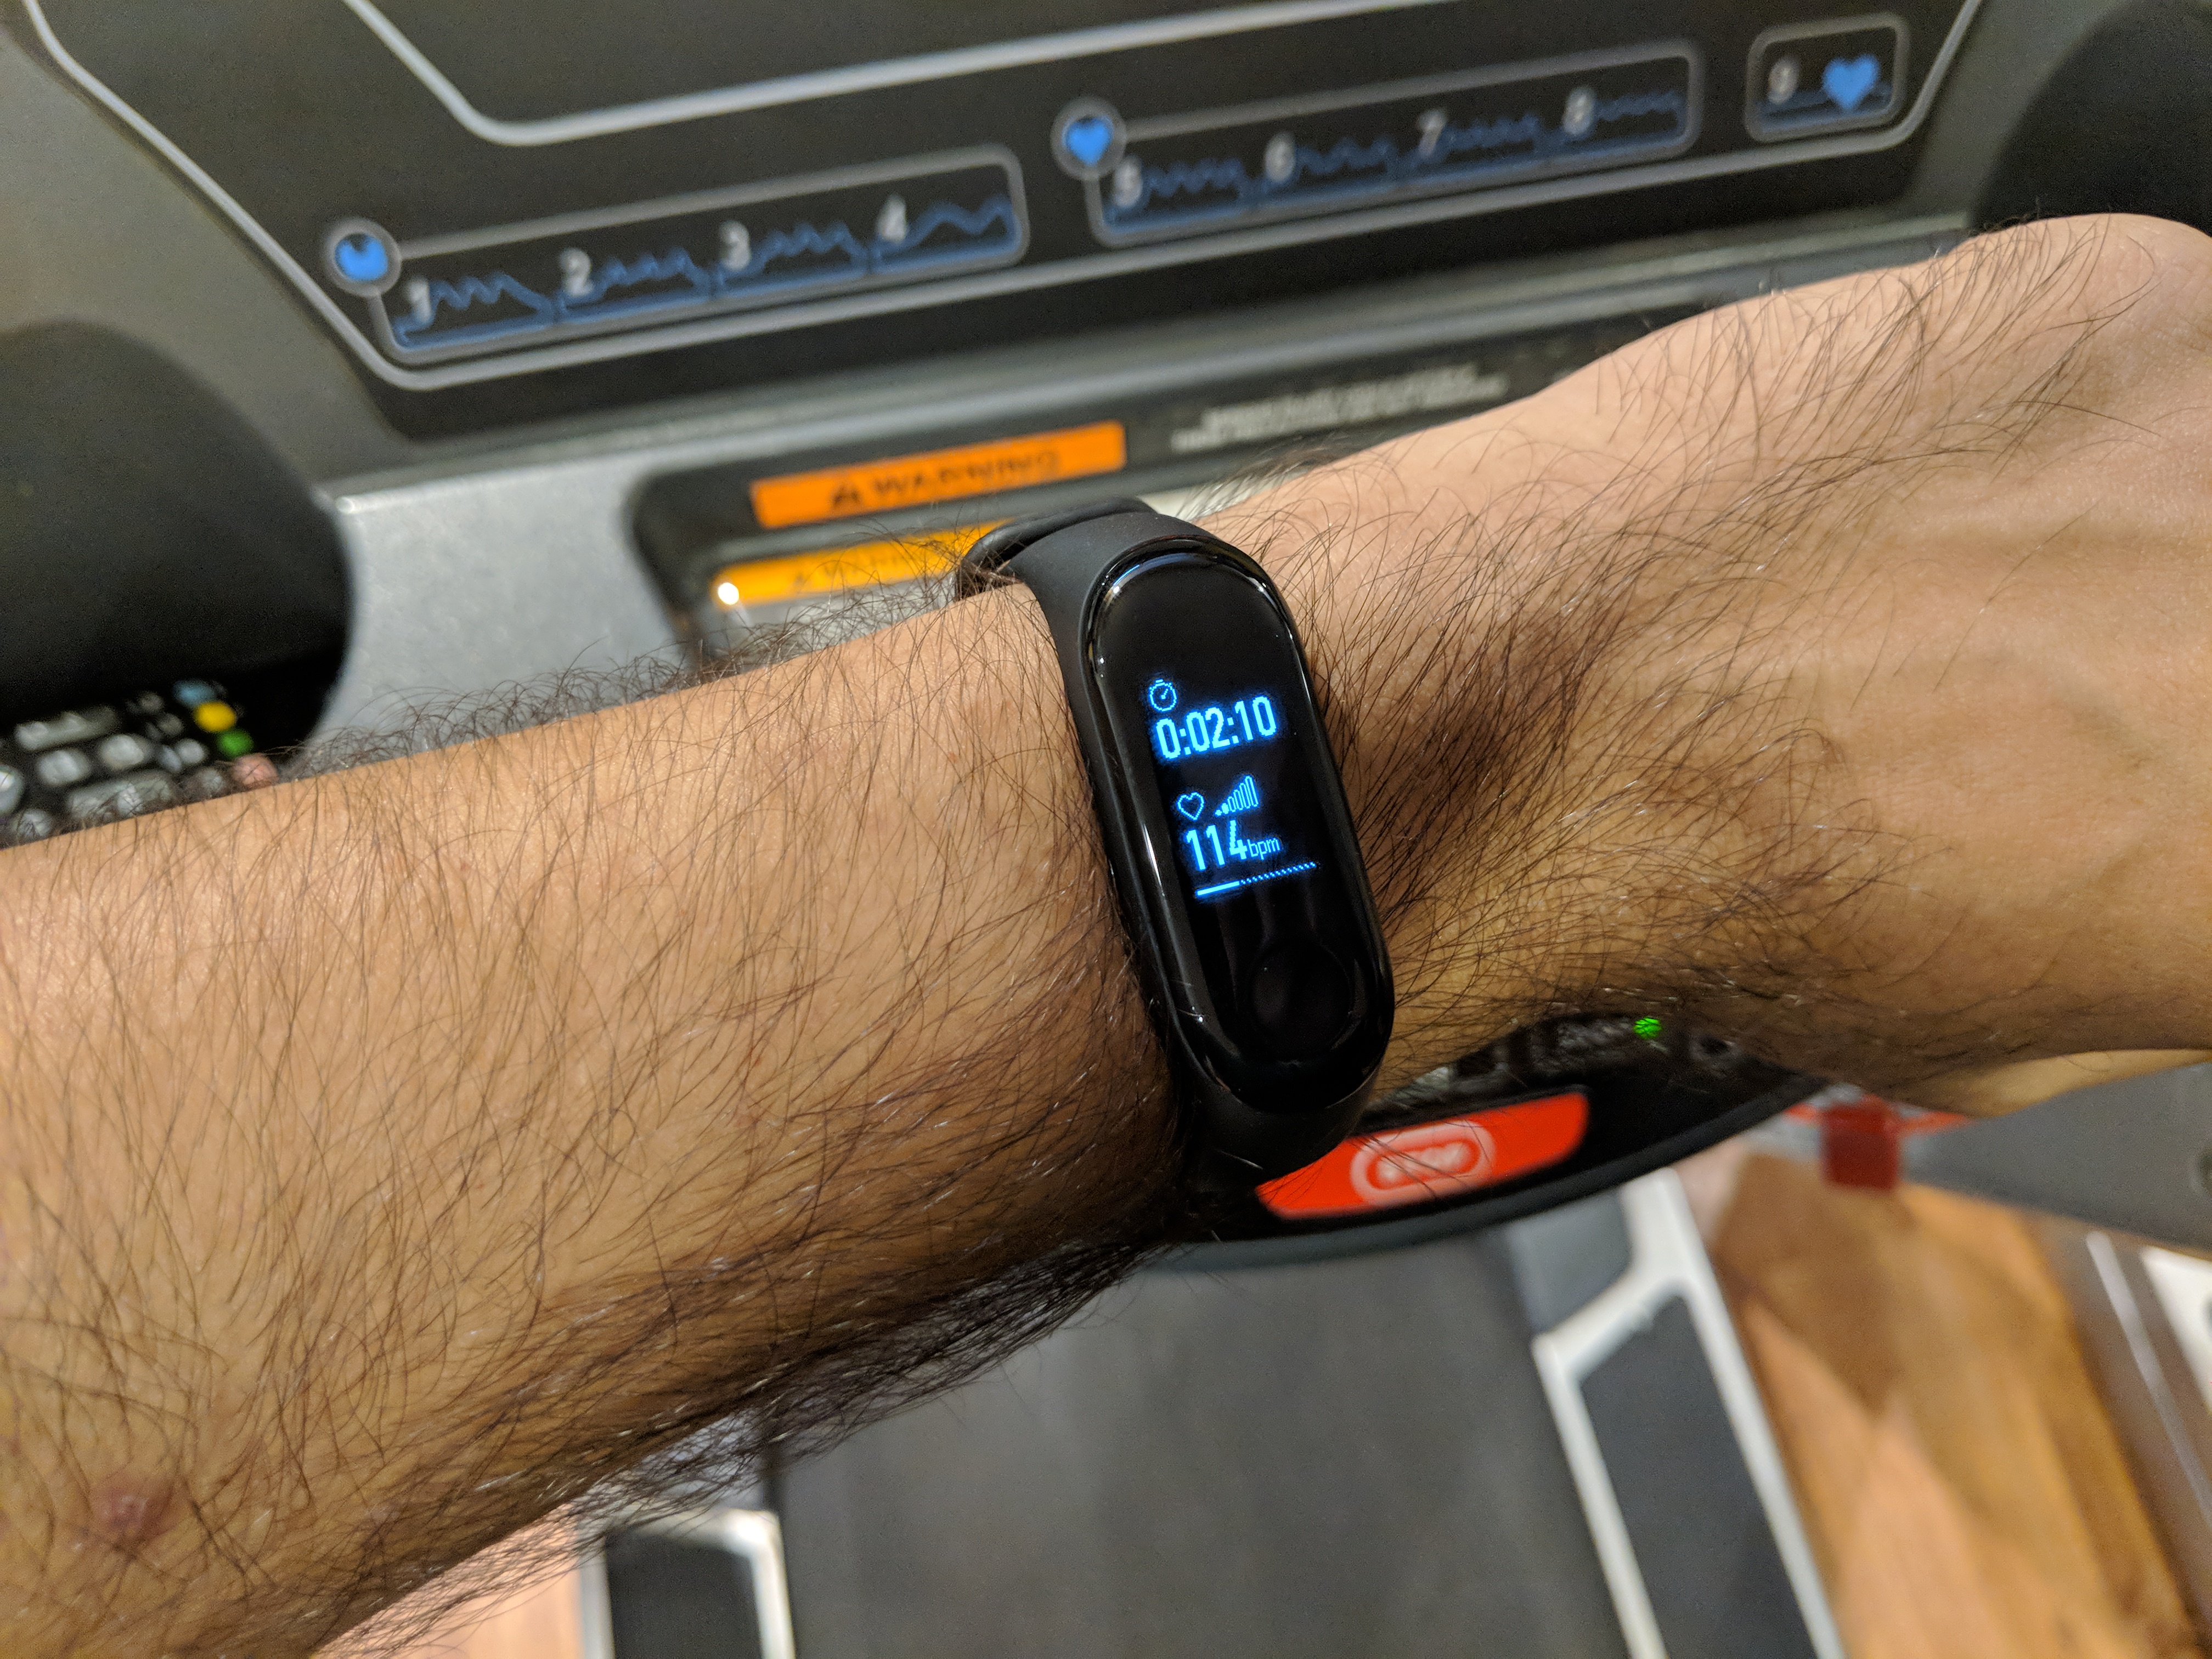 Mi Band 3 - Workout Treadmill Activity Review